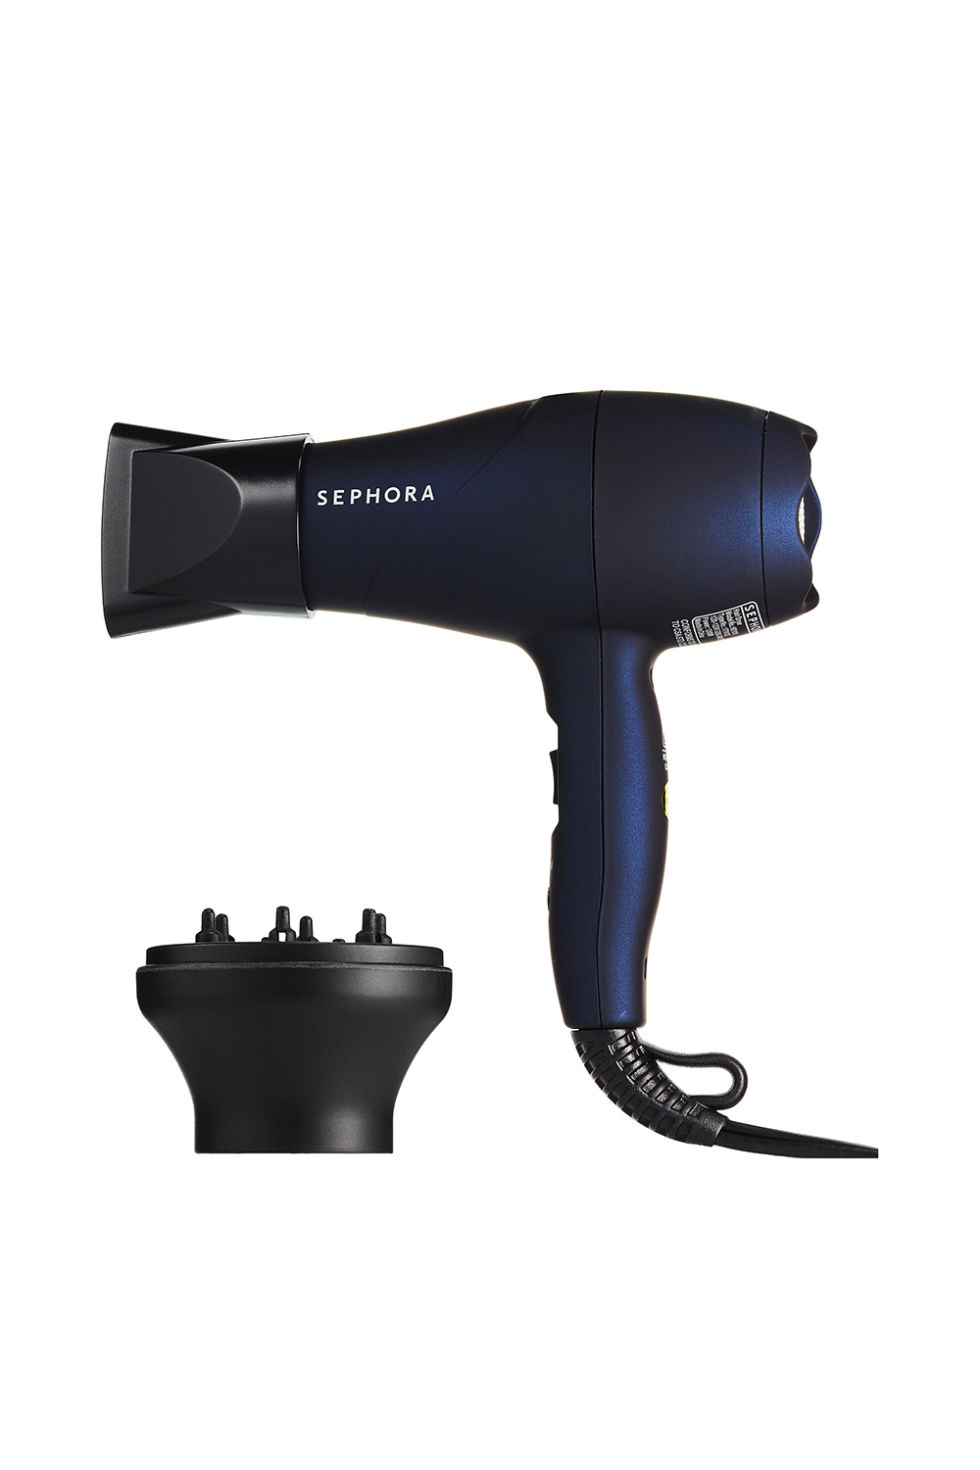 Sephora’s-Hair-Dryer1 6 Best-Selling Women's Beauty Products in 2020